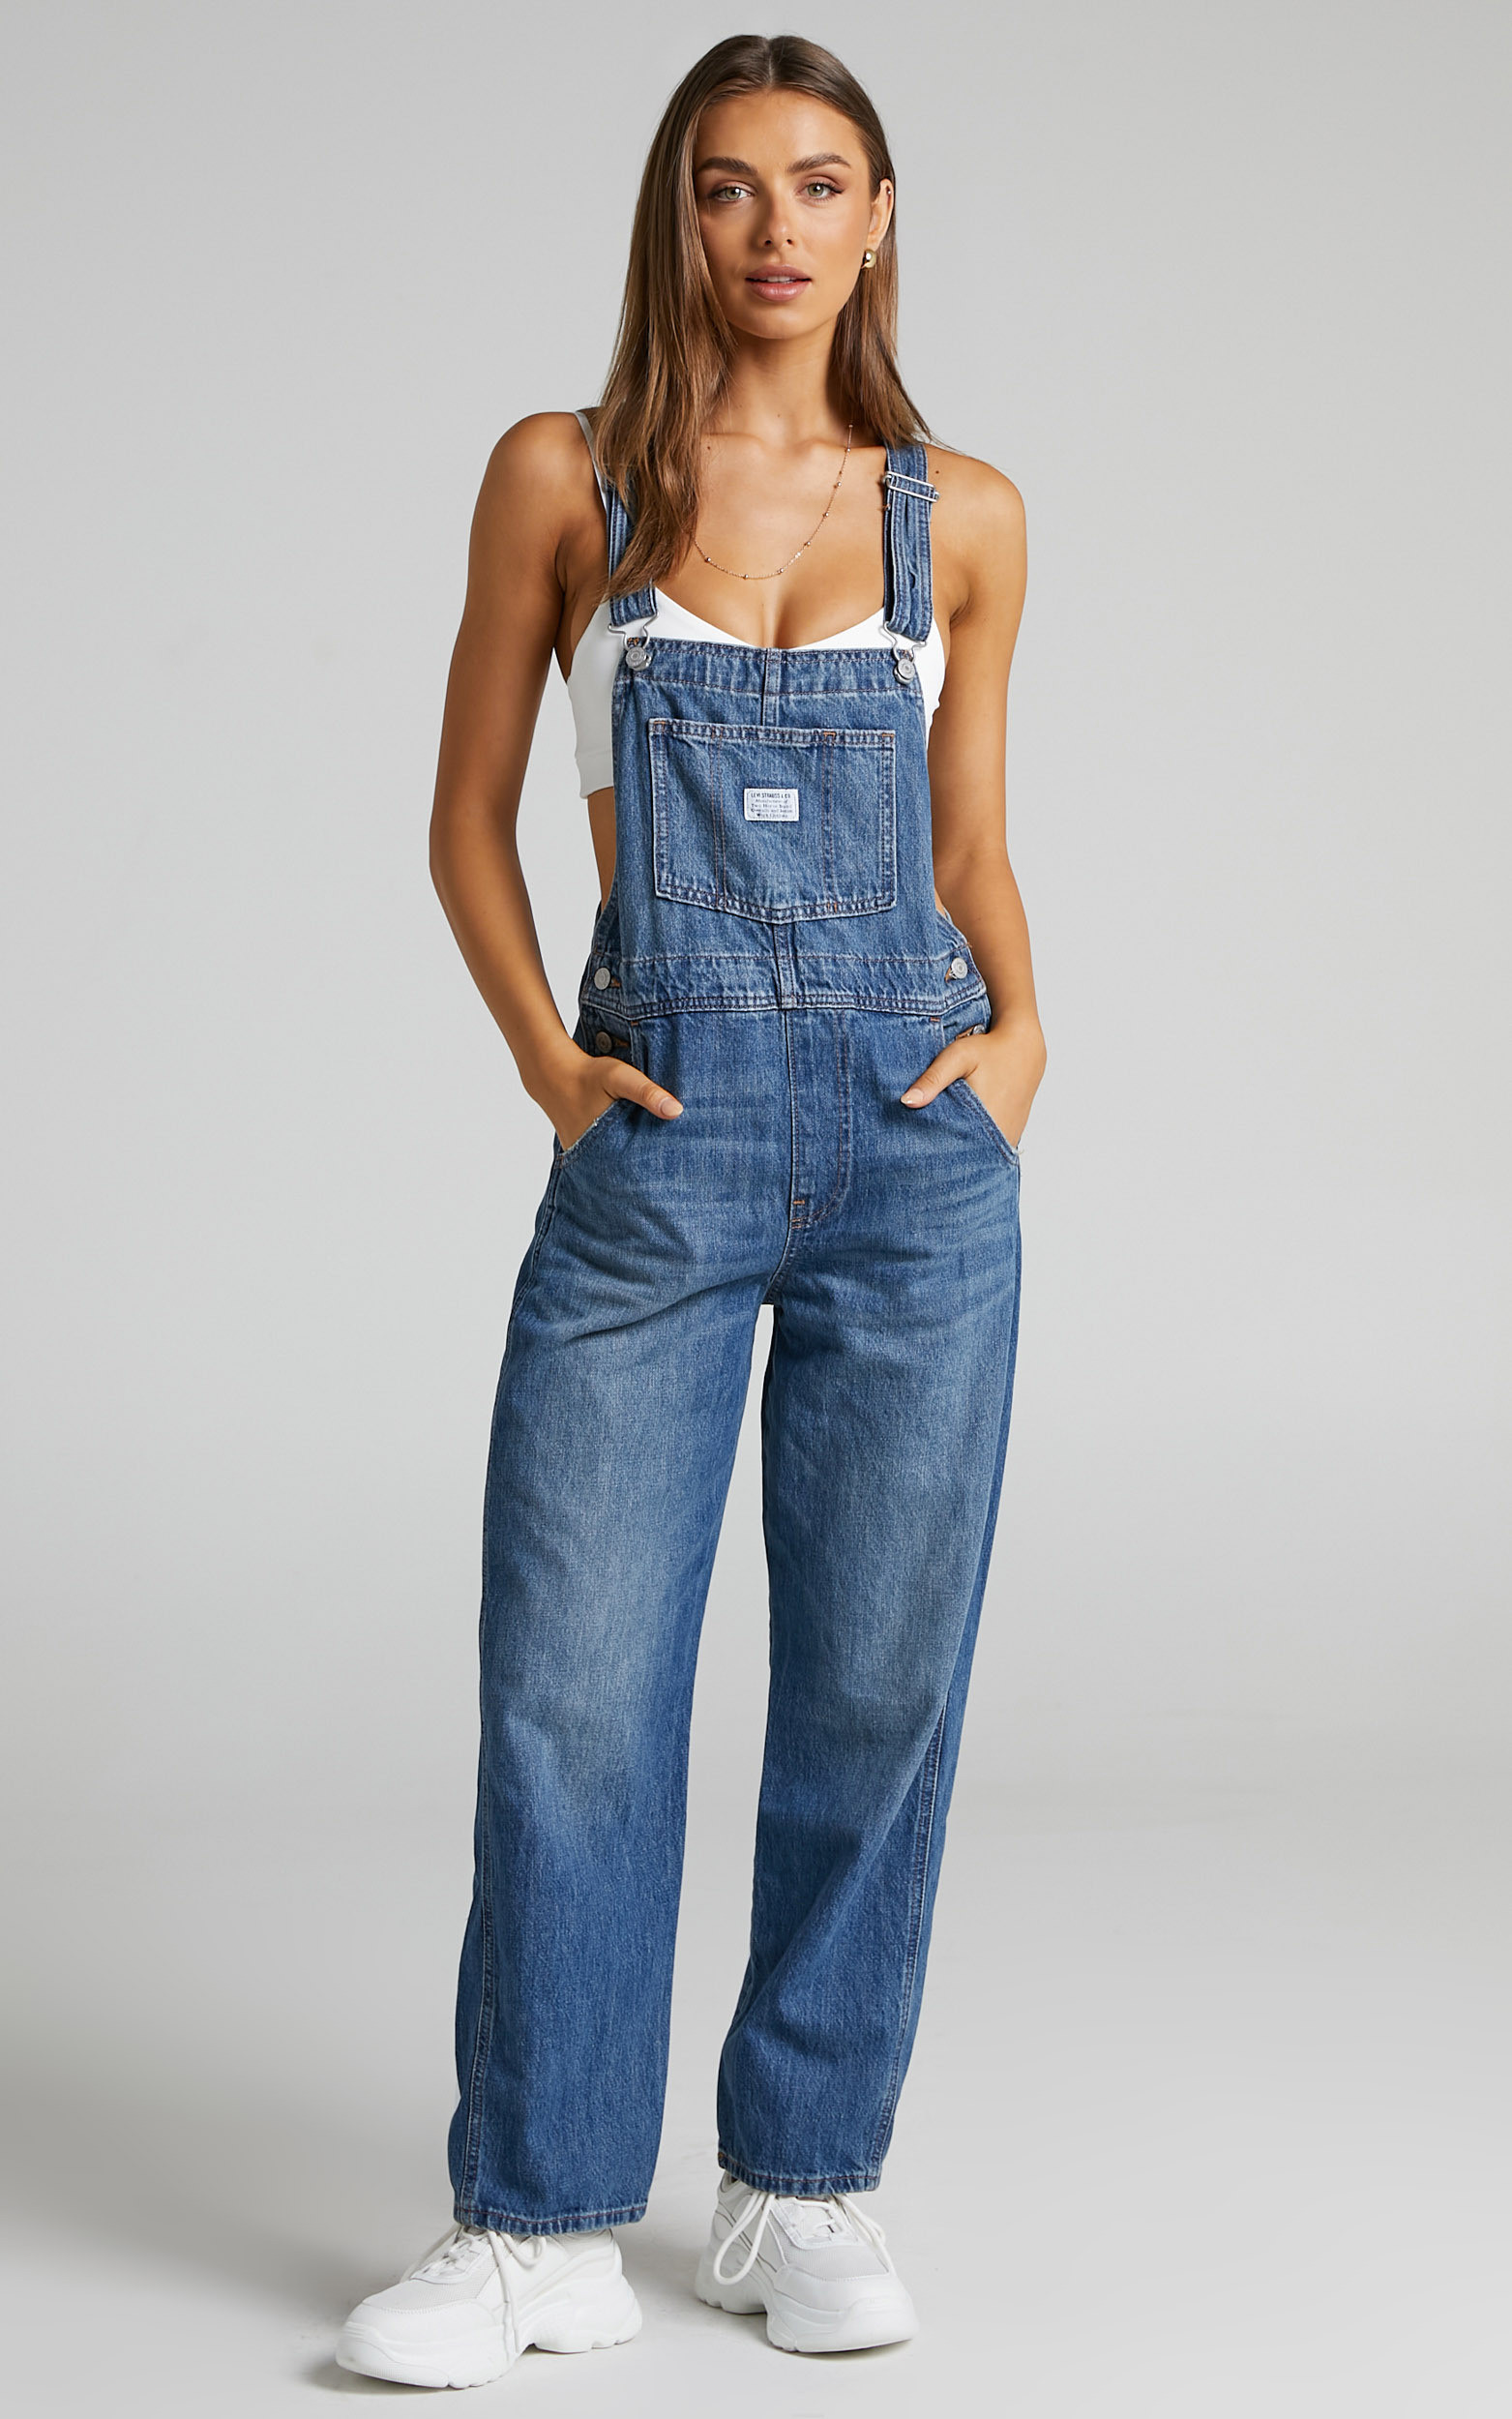 Levi's Vintage Overall In On Hiatus 